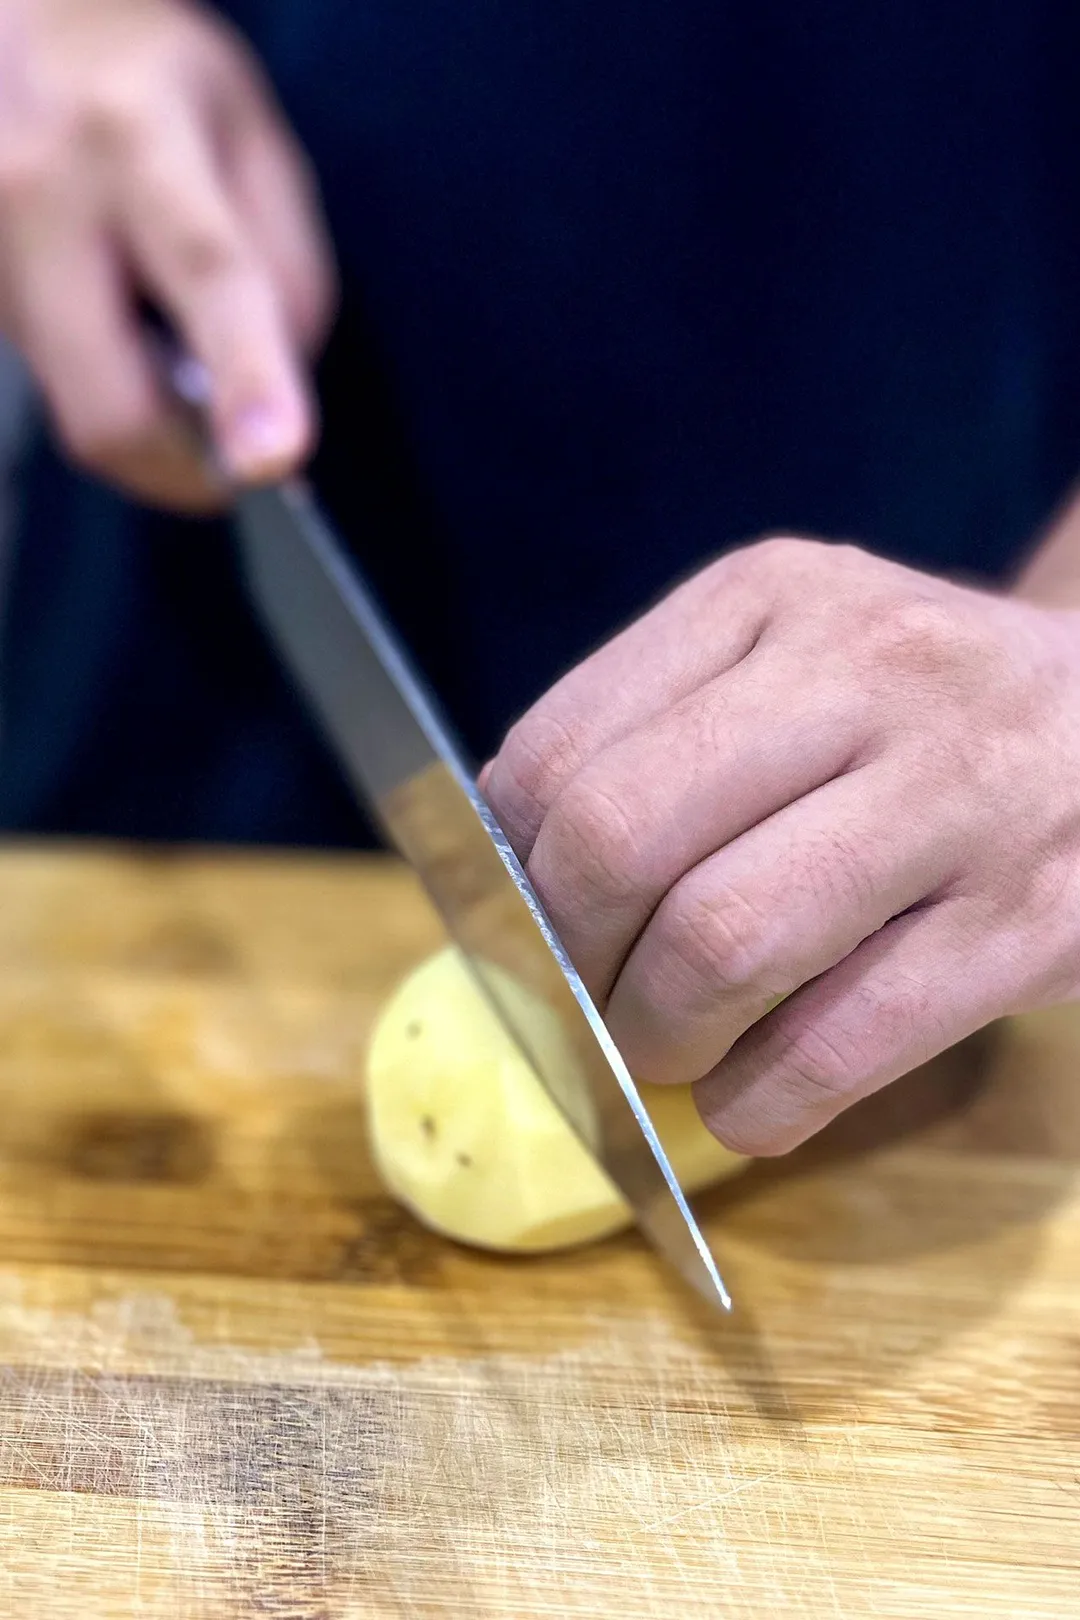 Hold a potato in one hand and use a knife to cut the potato in the other